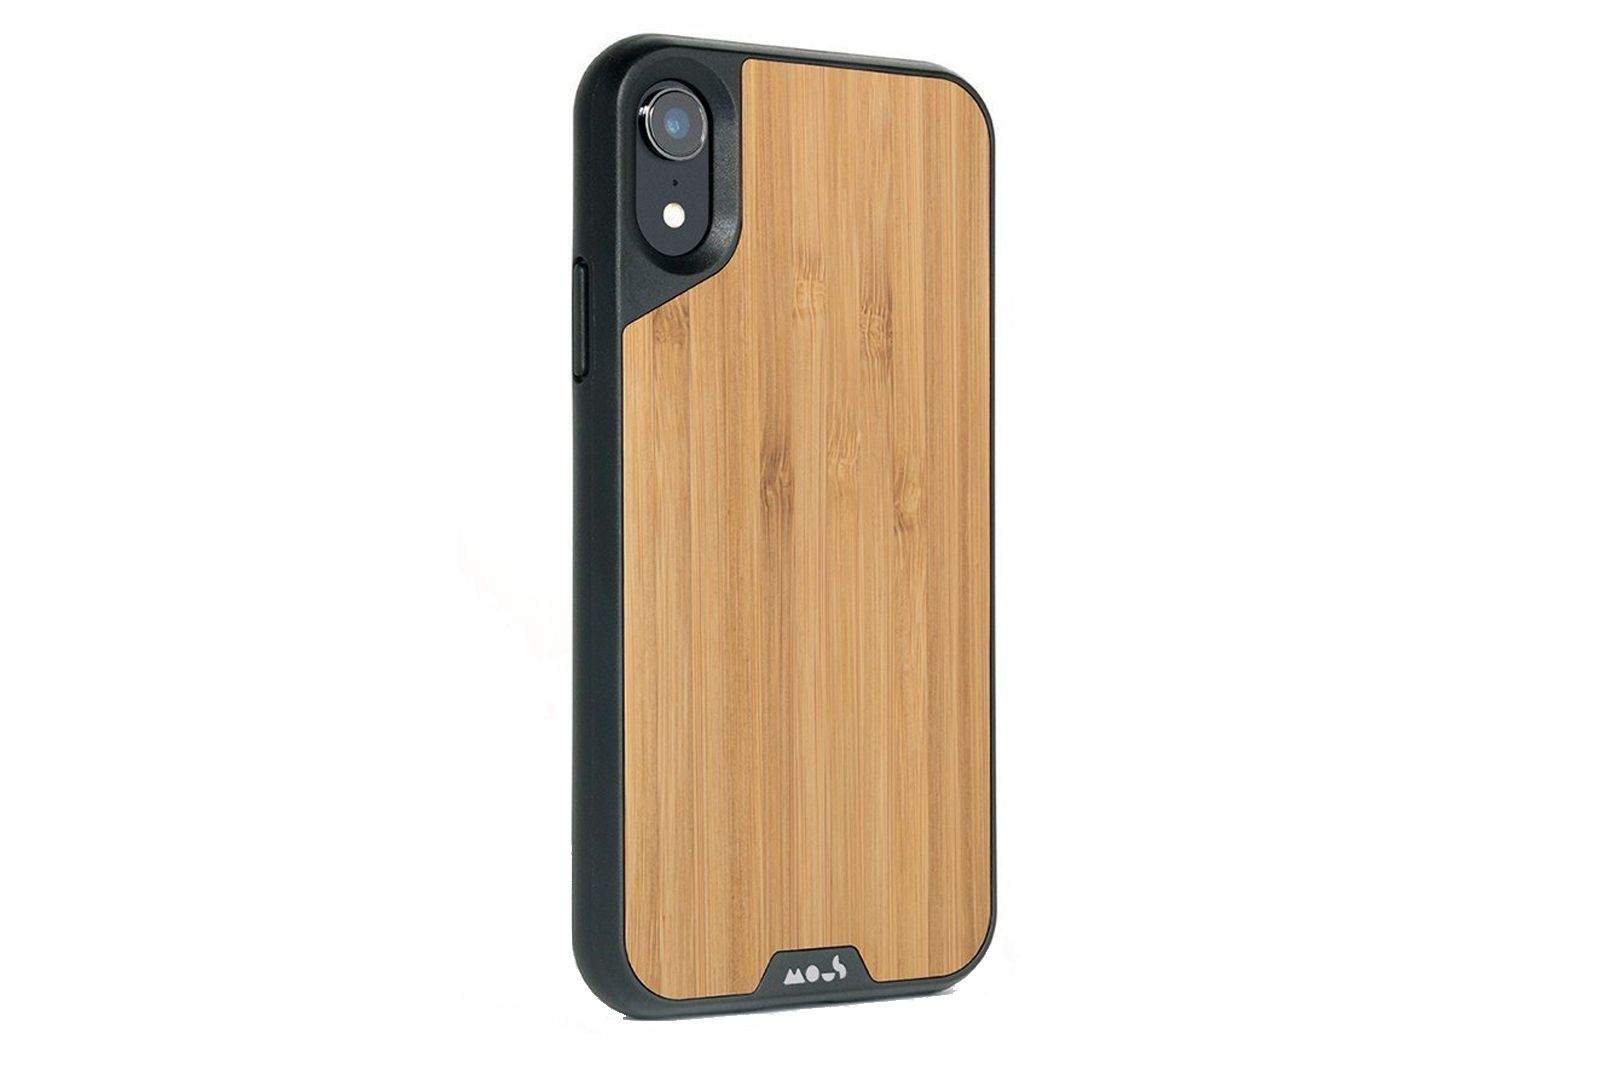 Best Iphone Xr Cases Protect Your New Apple Device image 7